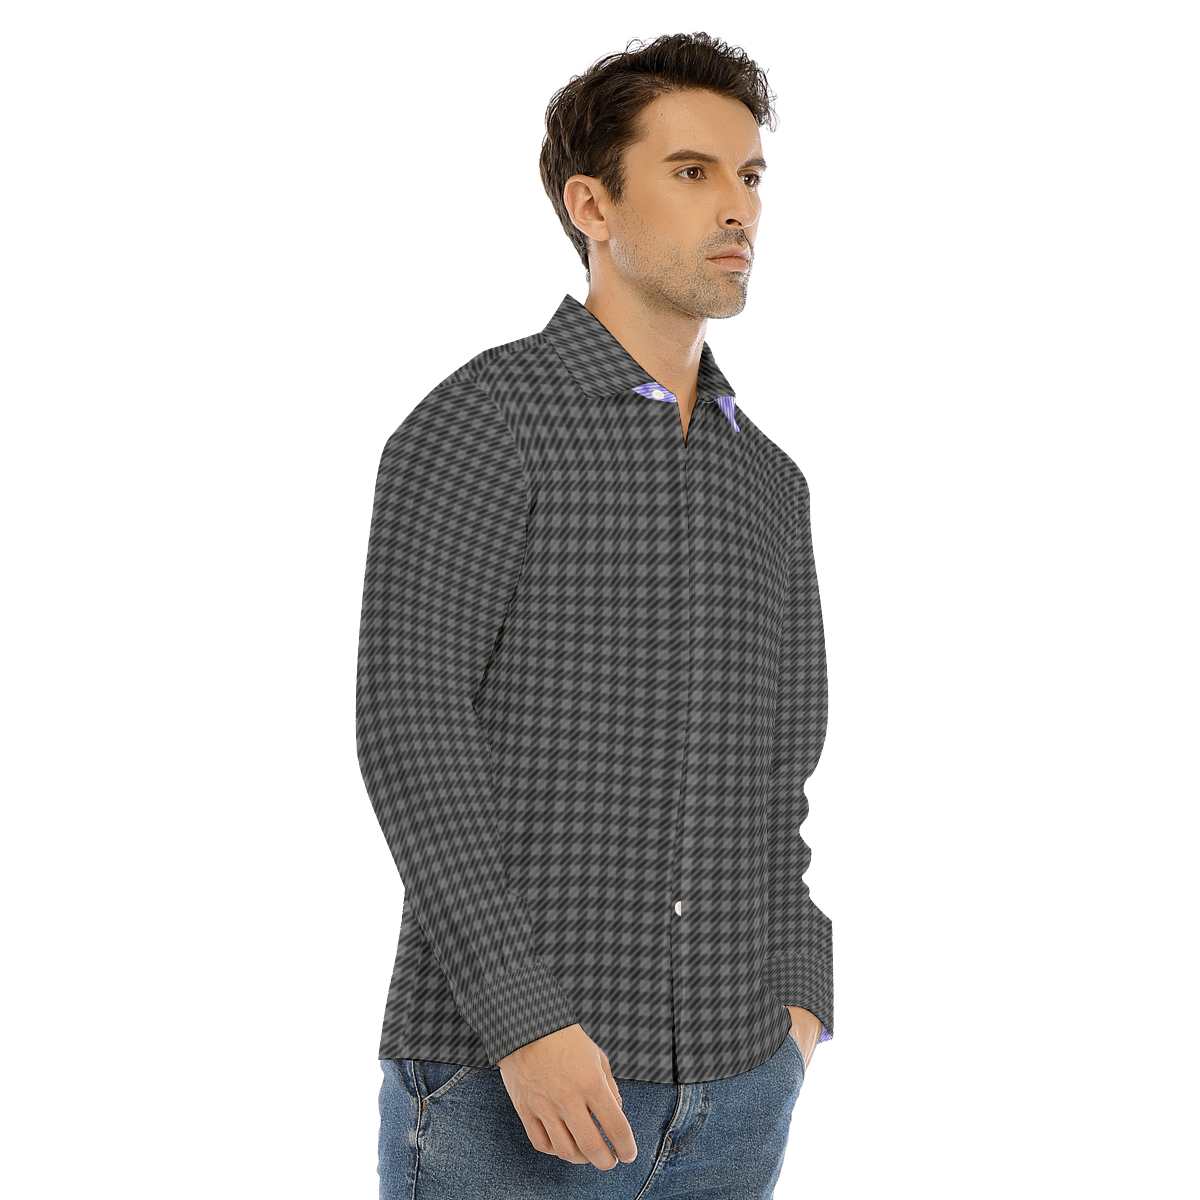 Black Printed Twill Checkmate Men's Buttonup Shirt